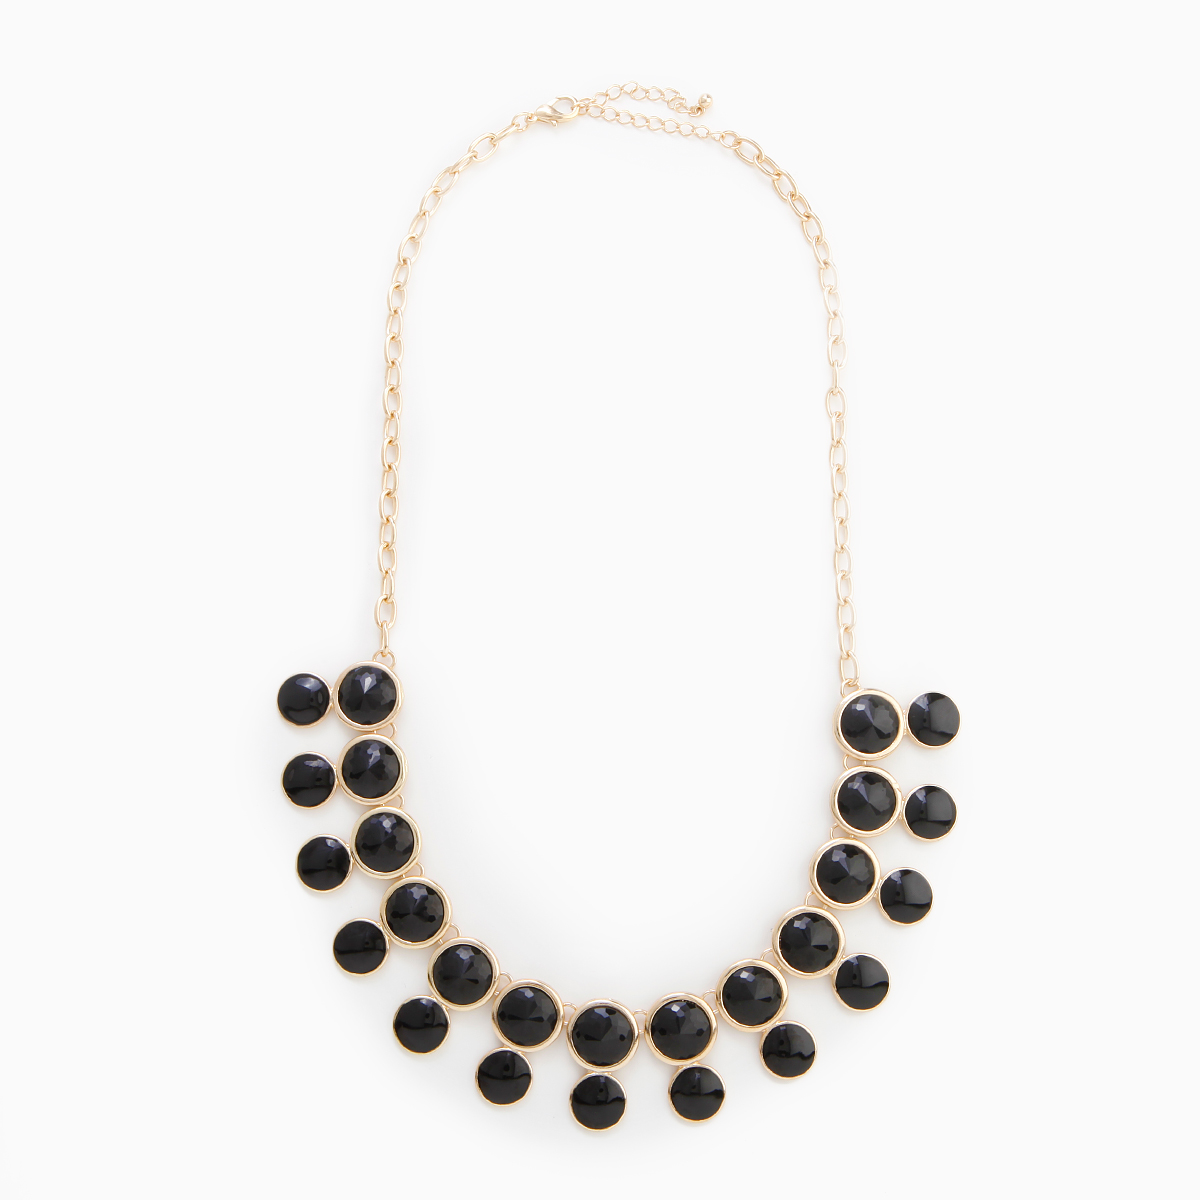 Glamour-Rays Necklace in Black | DAILYLOOK